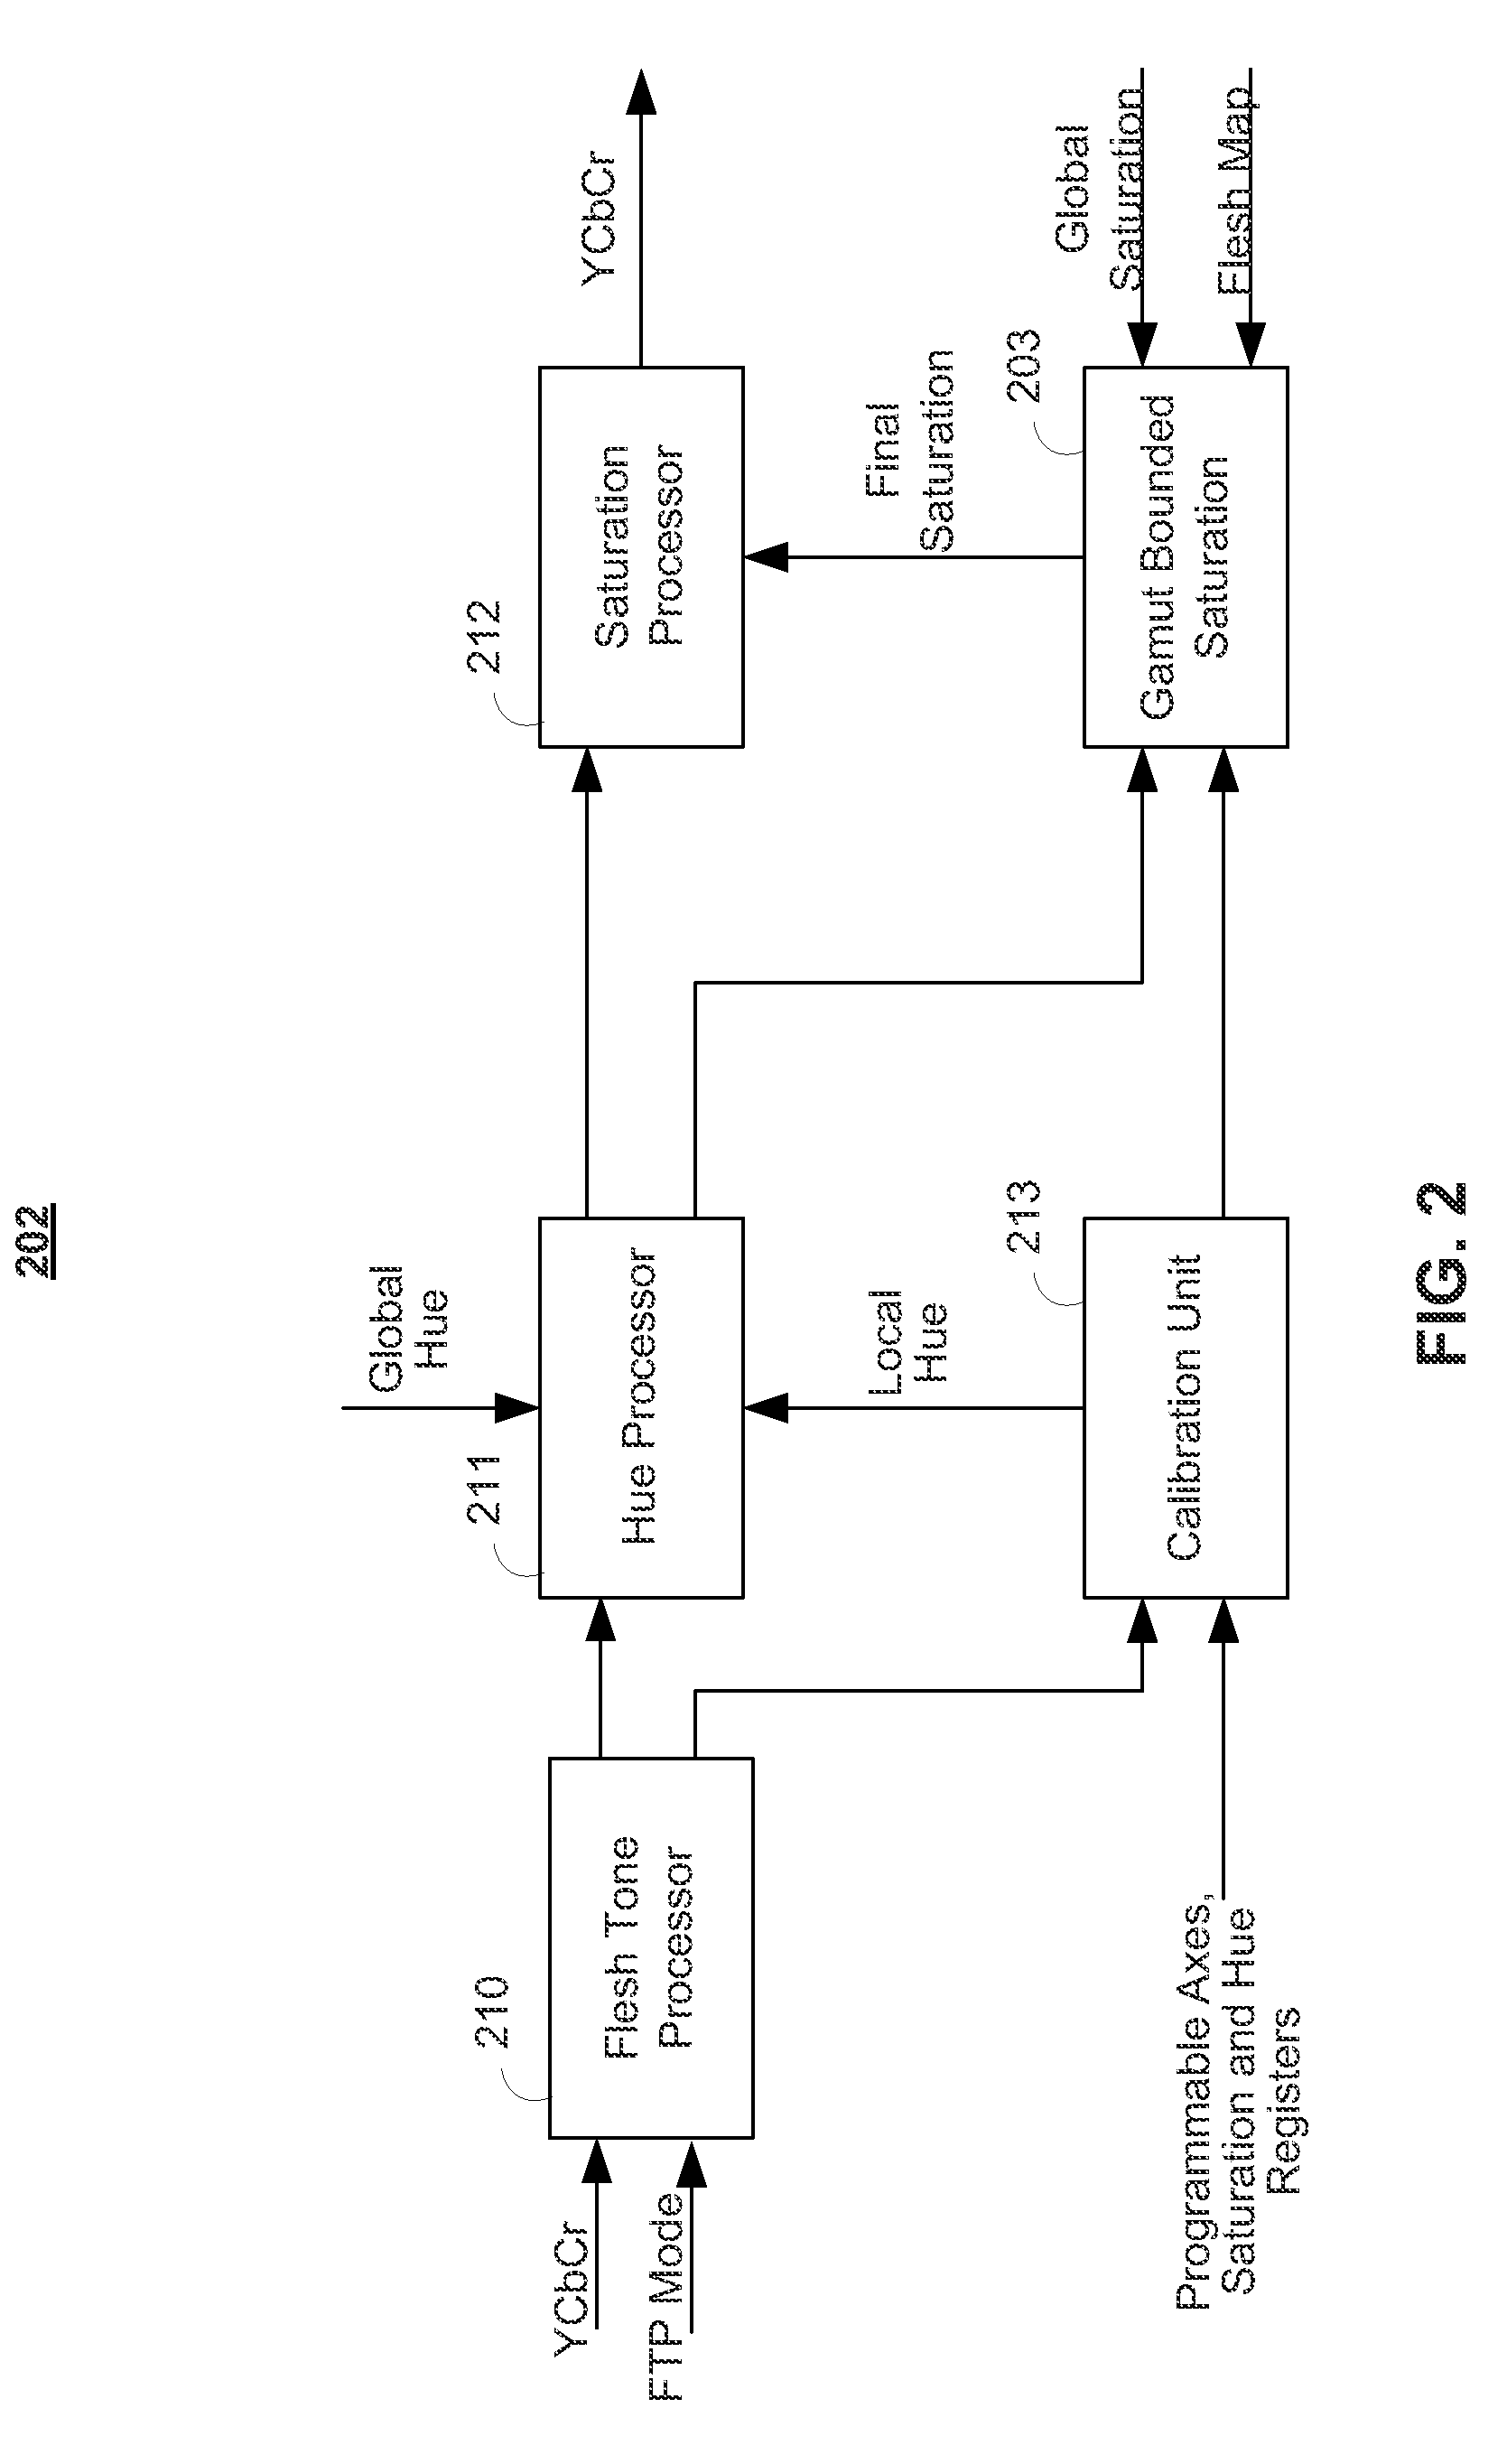 System and methods for gamut bounded saturation adaptive color enhancement